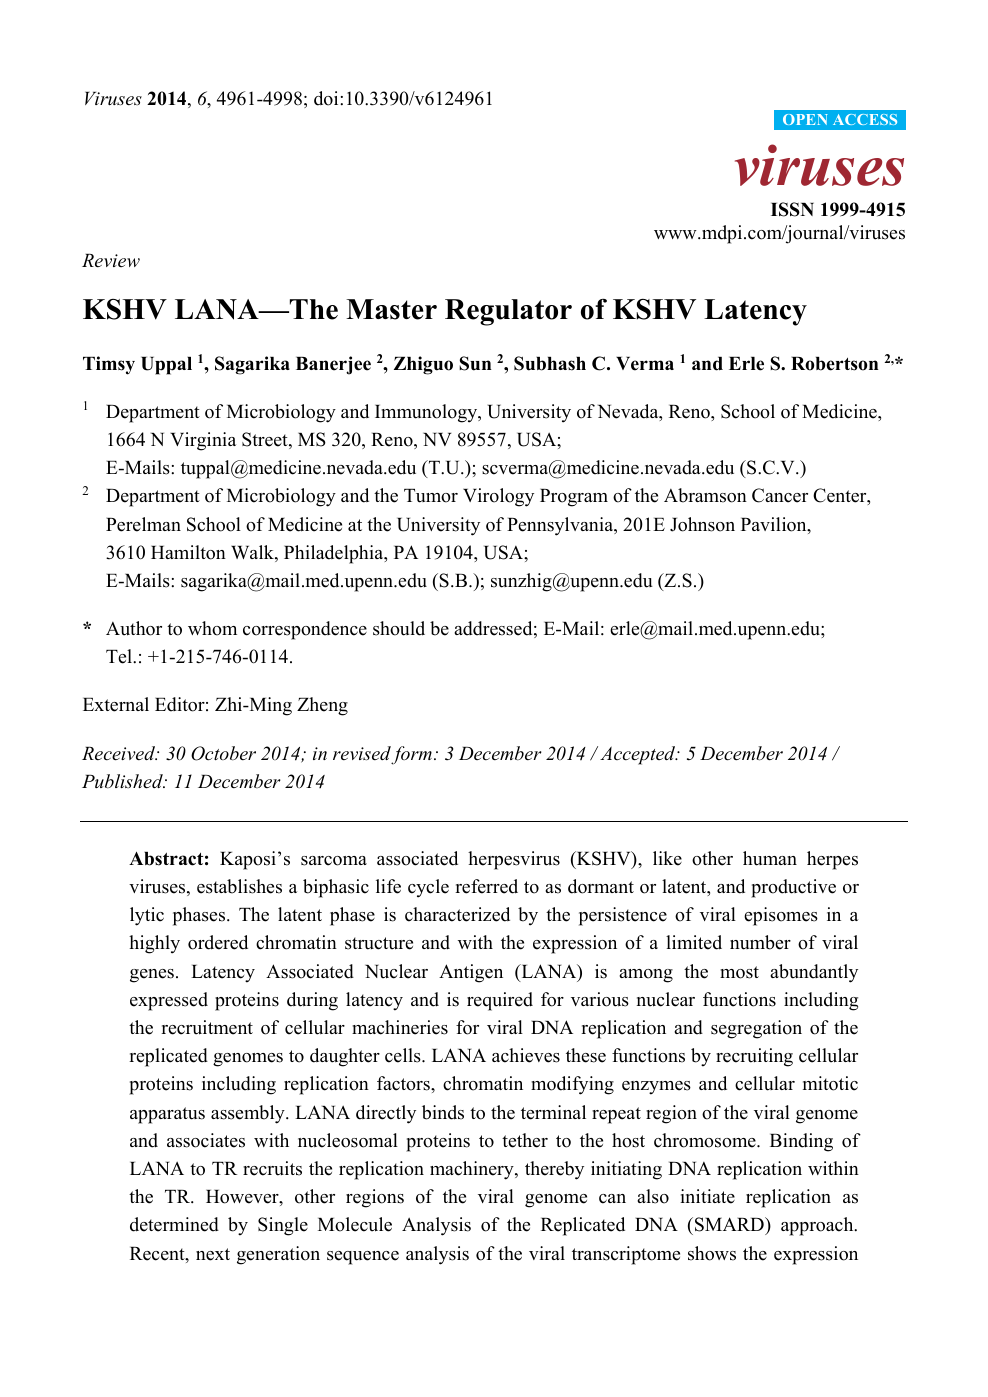 Kshv Lana The Master Regulator Of Kshv Latency Topic Of Research Paper In Biological Sciences Download Scholarly Article Pdf And Read For Free On Cyberleninka Open Science Hub - cha ching mr krabs roblox id